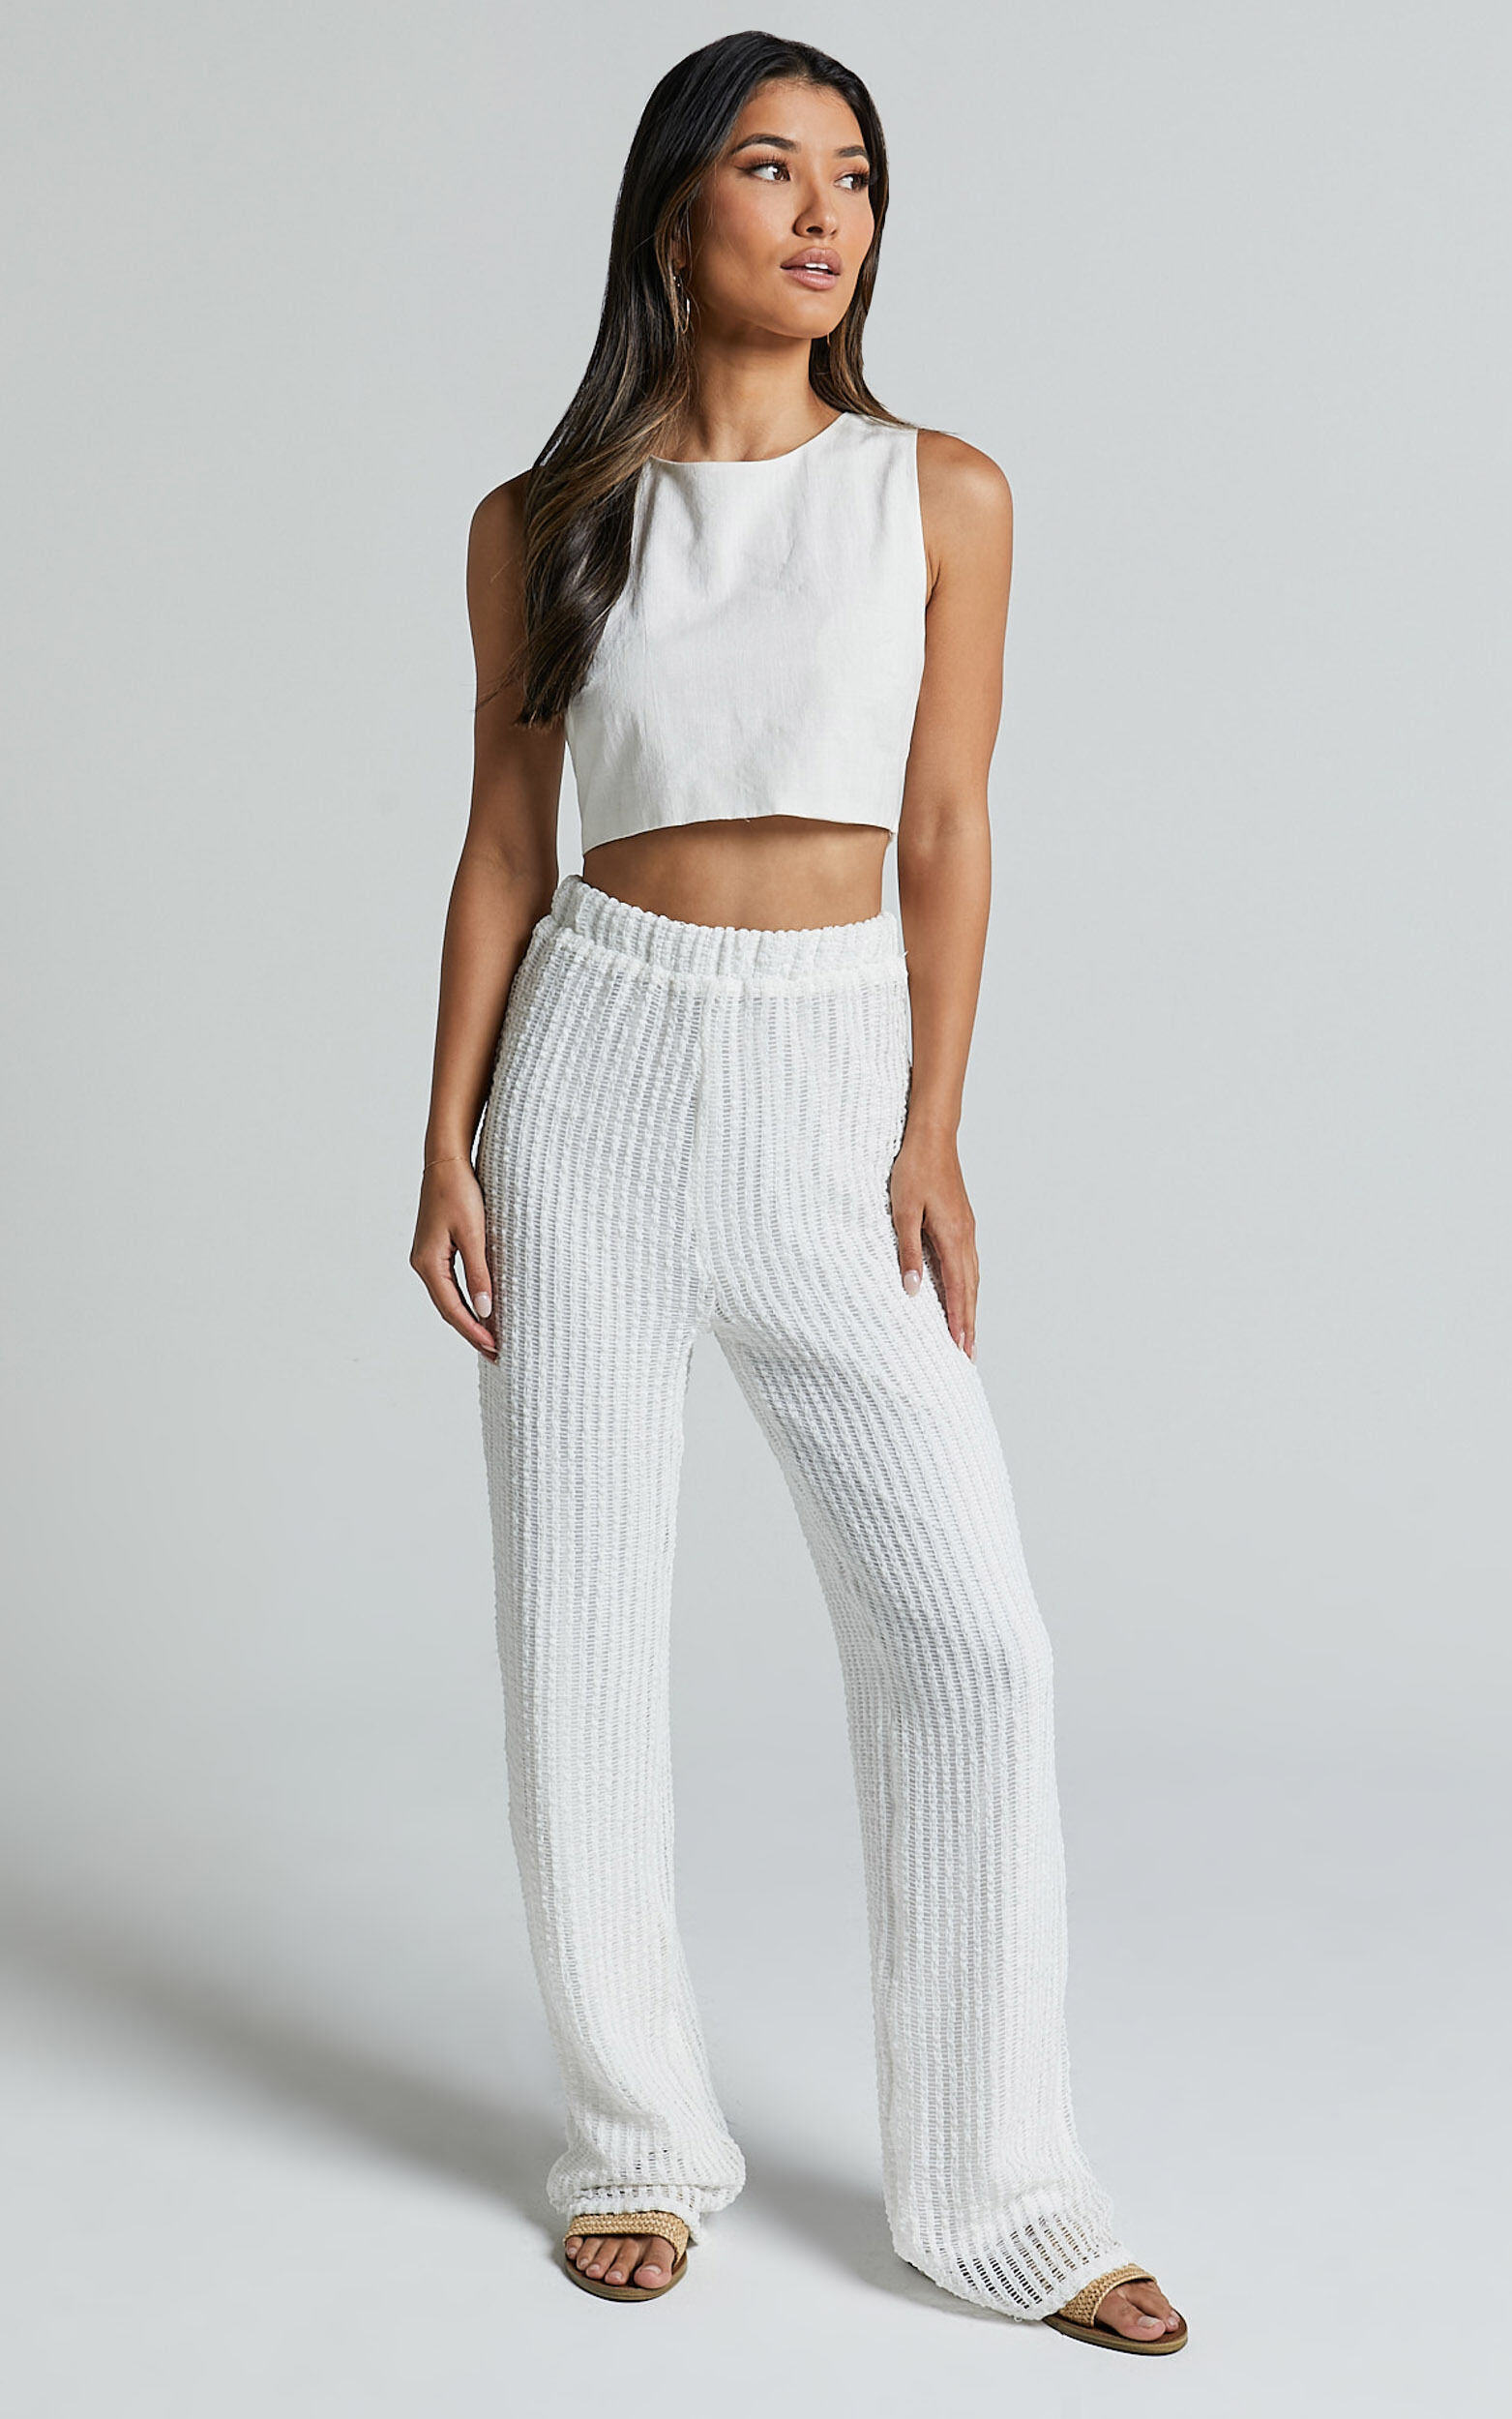 Rowland Pants - Wide Leg in White - 06, WHT1